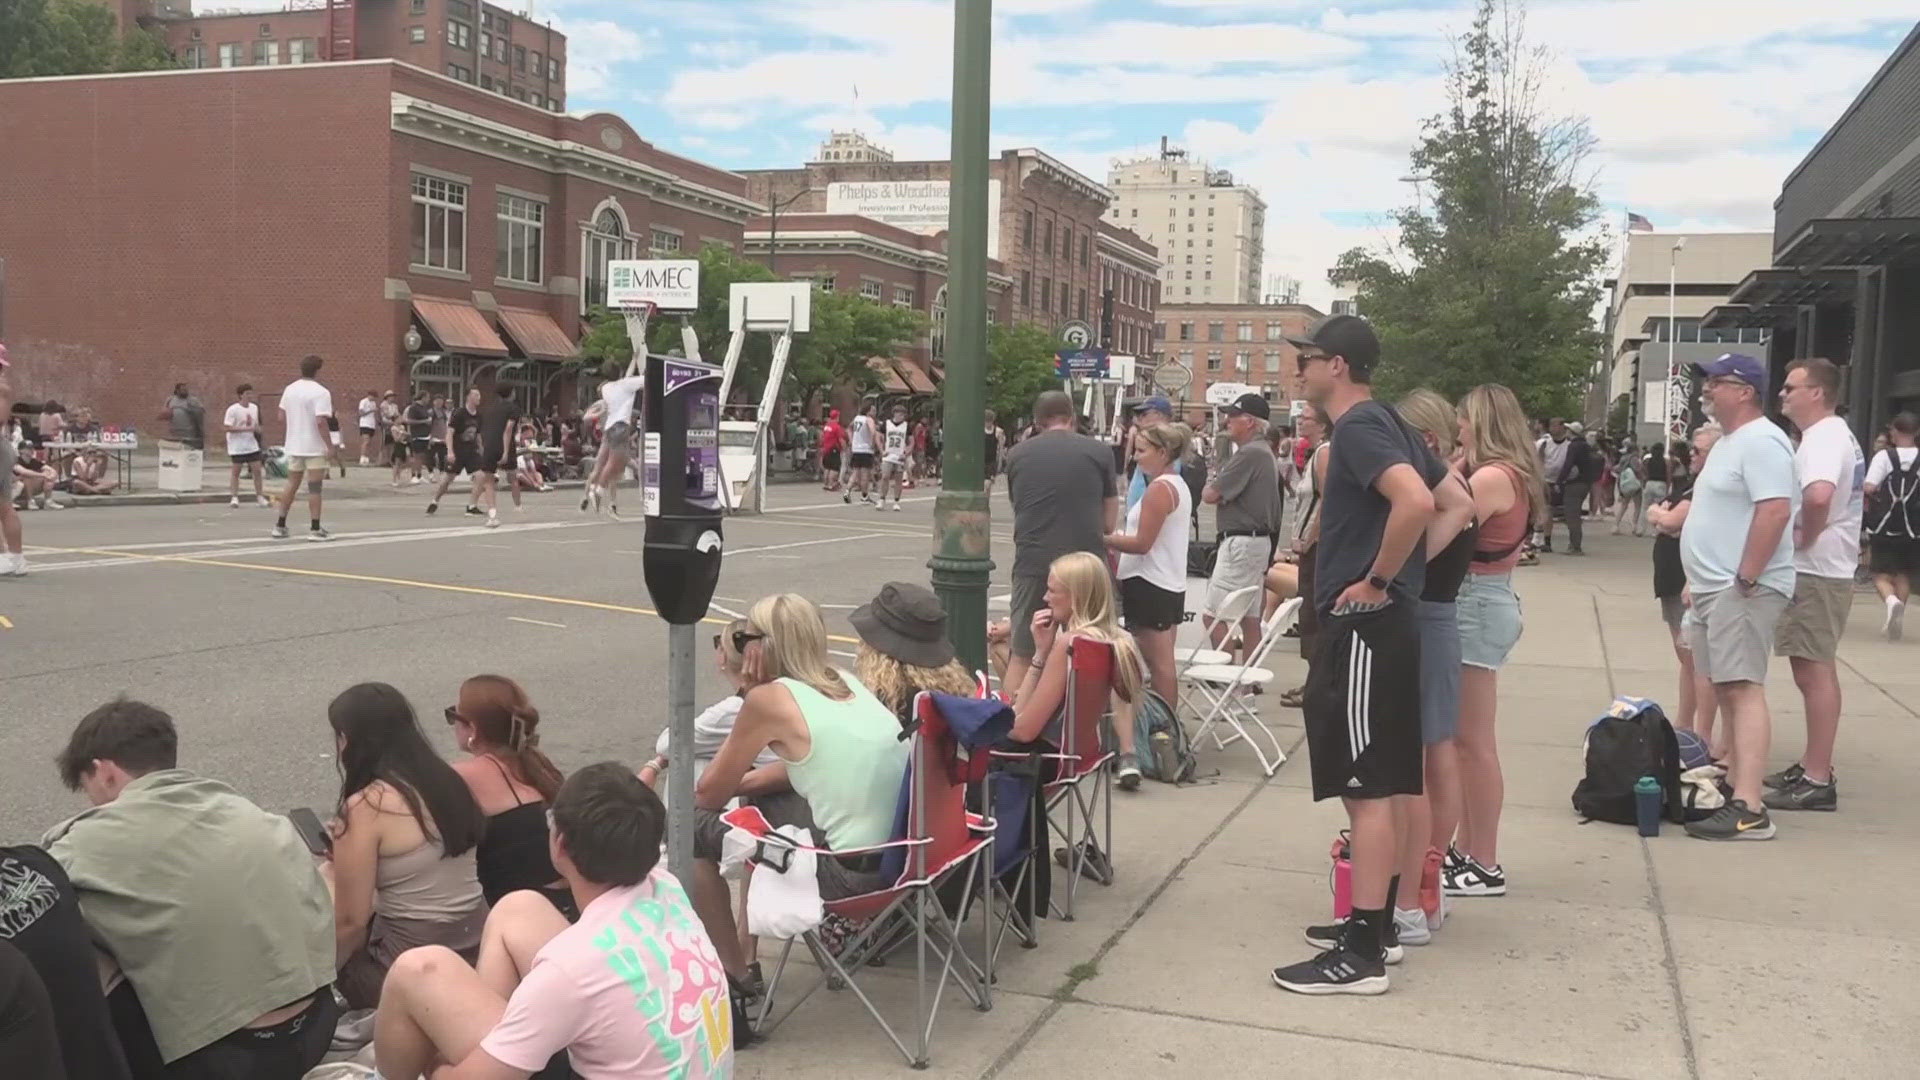 Hoopfest couldn't have happened without the support of the community and its many volunteers.